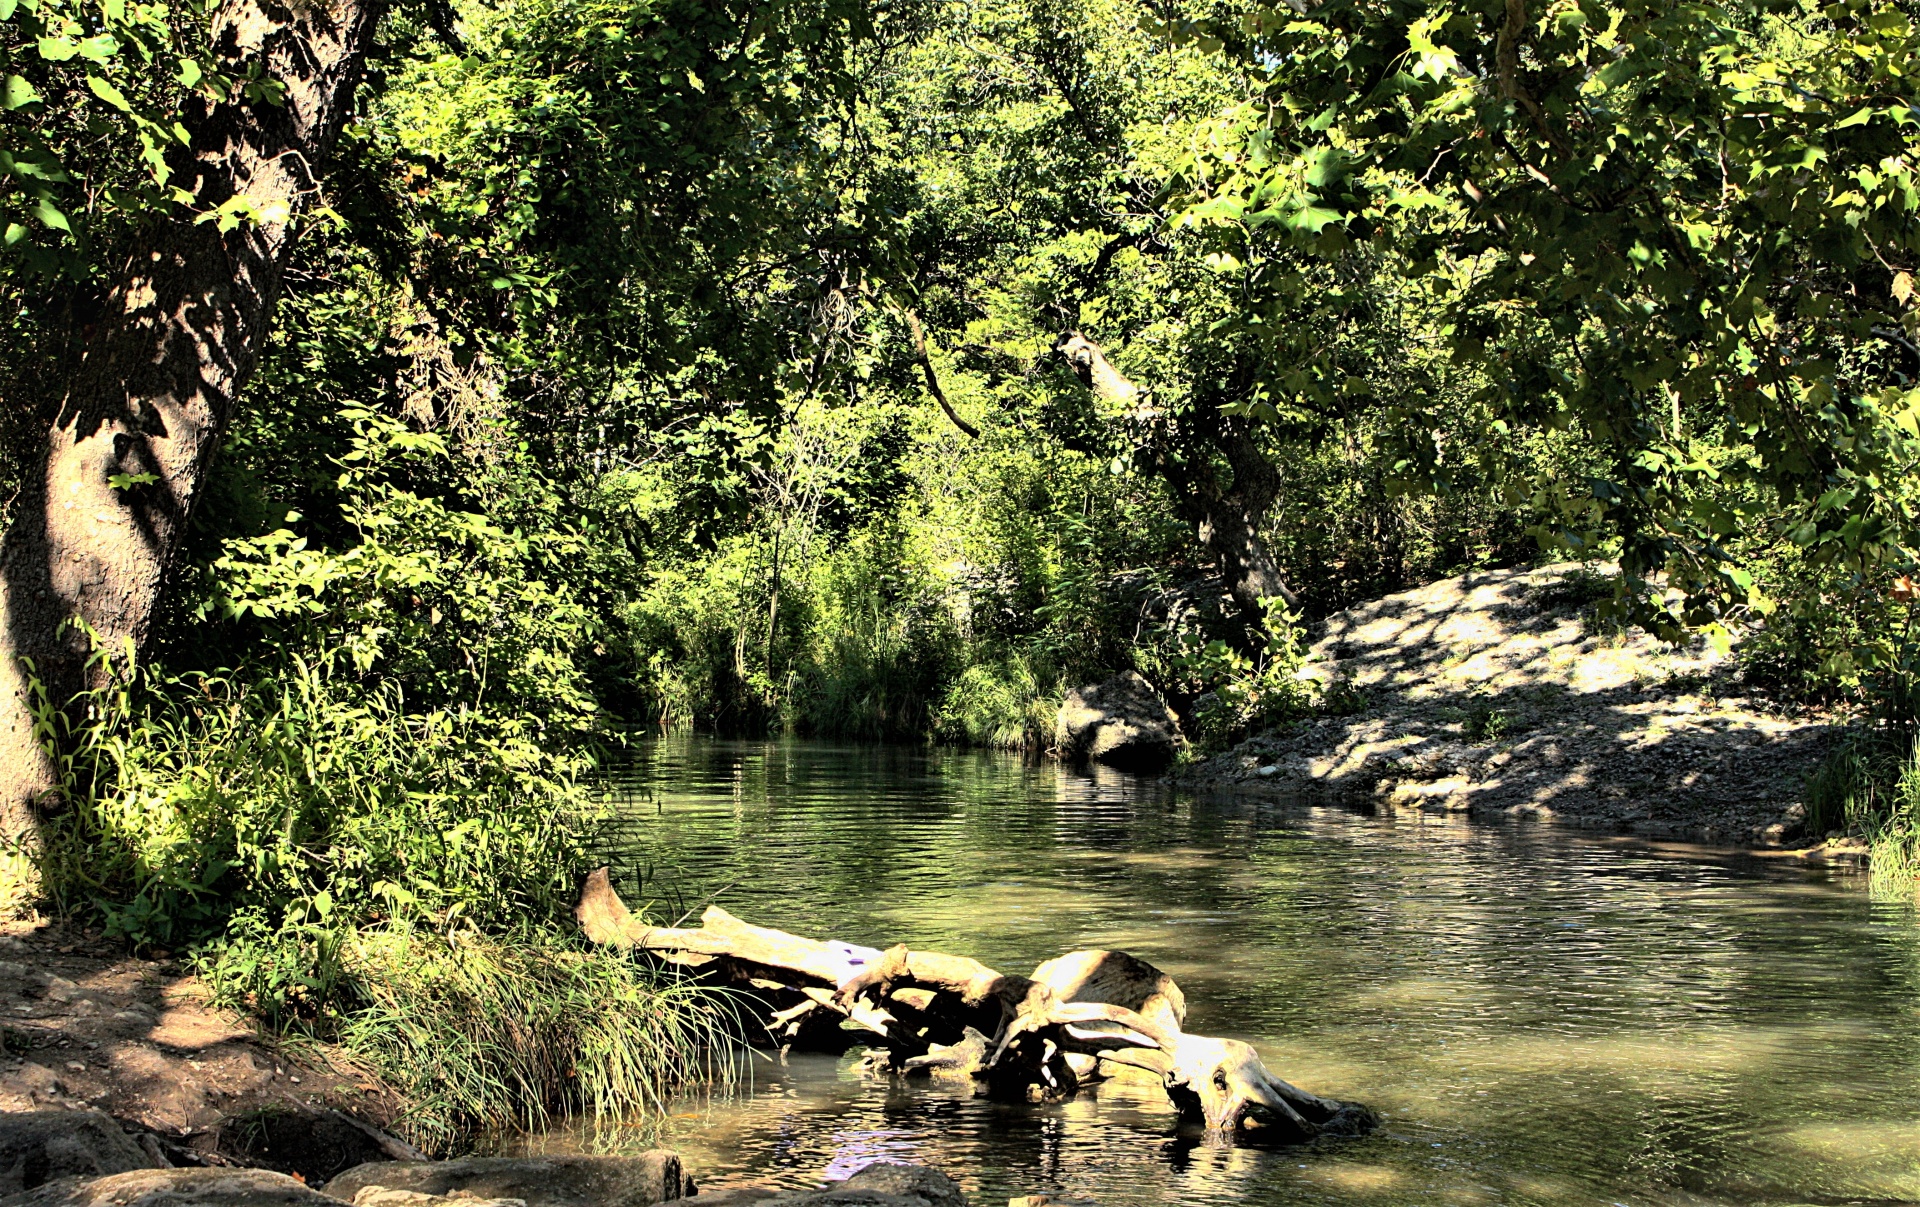 A Tranquil Creek In Summer